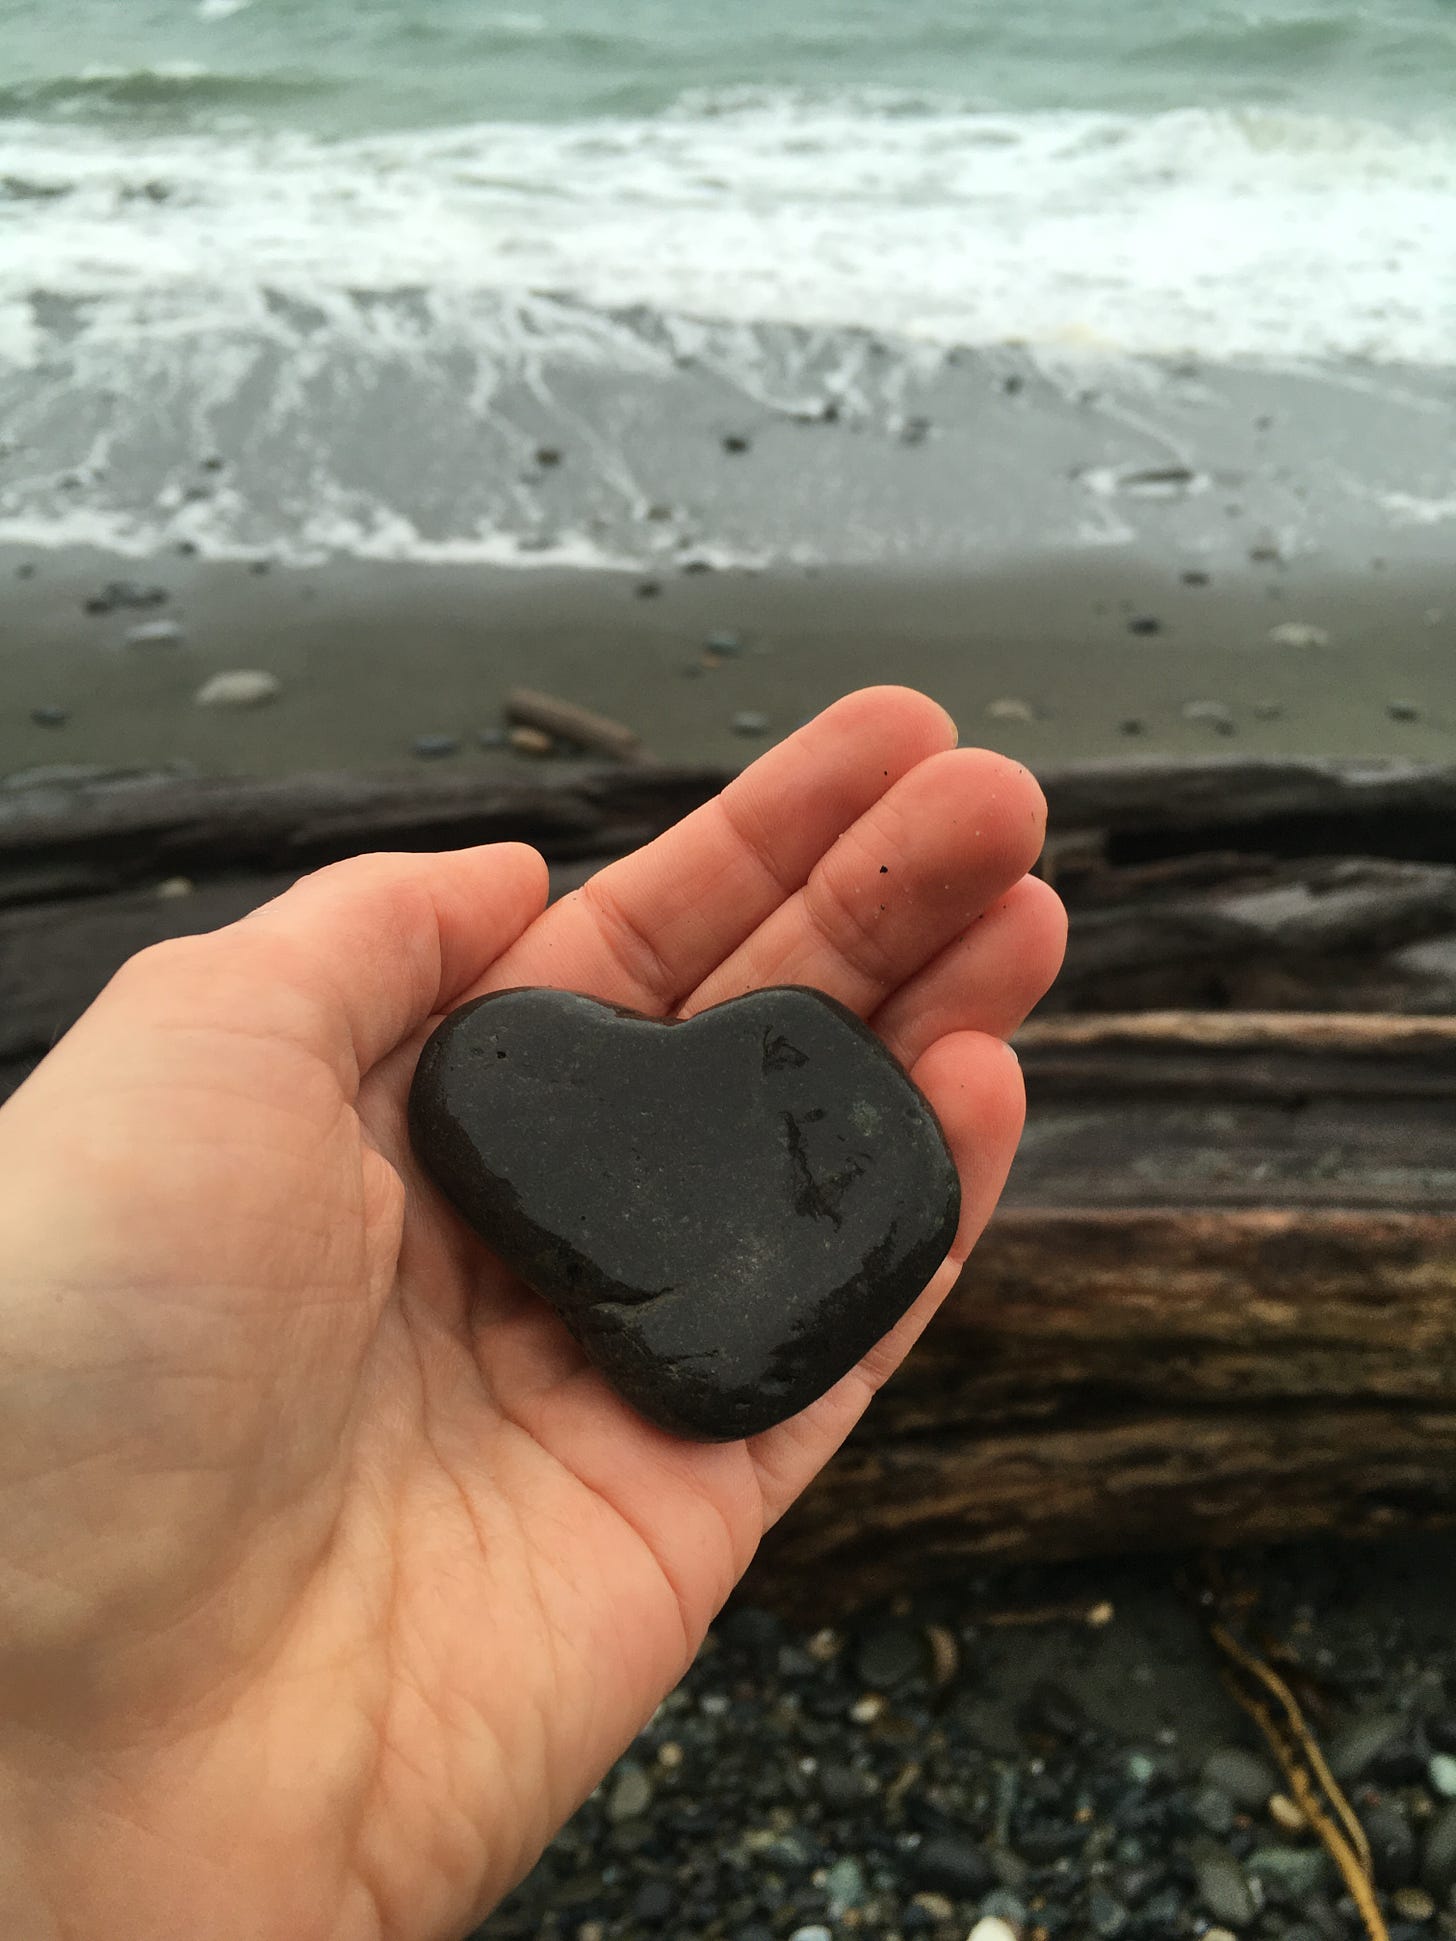 beige left hand cups somewhat heart-shaped wet dark gray stone in front of camera with background a bit fuzzy of wet driftwood logs and then the ocean waves ebbing and flowing beyond on sandy rock with some rocks.